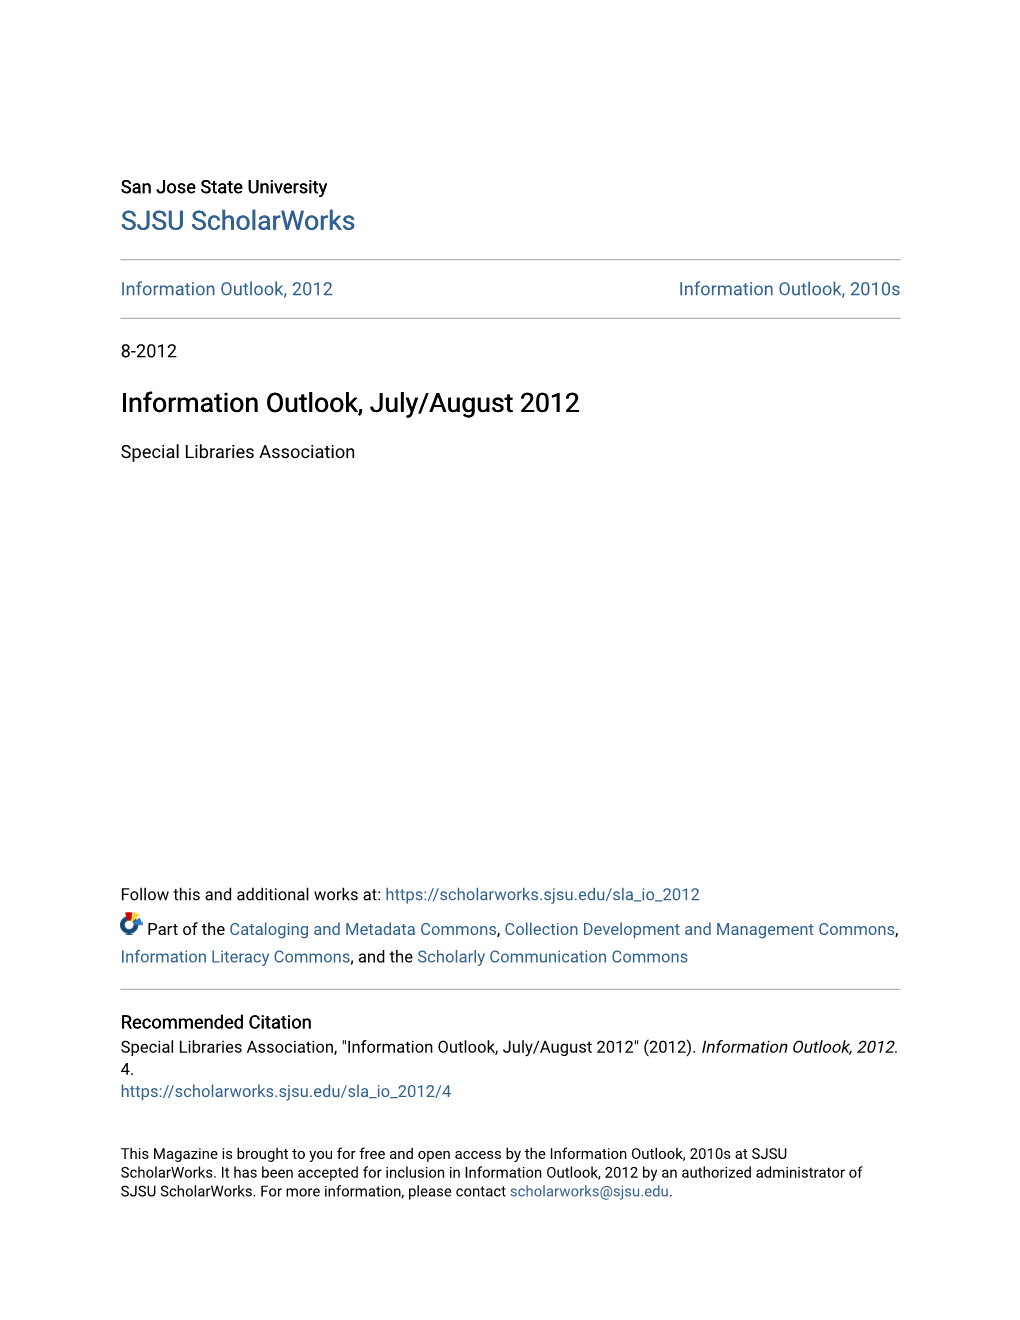 Information Outlook, July/August 2012